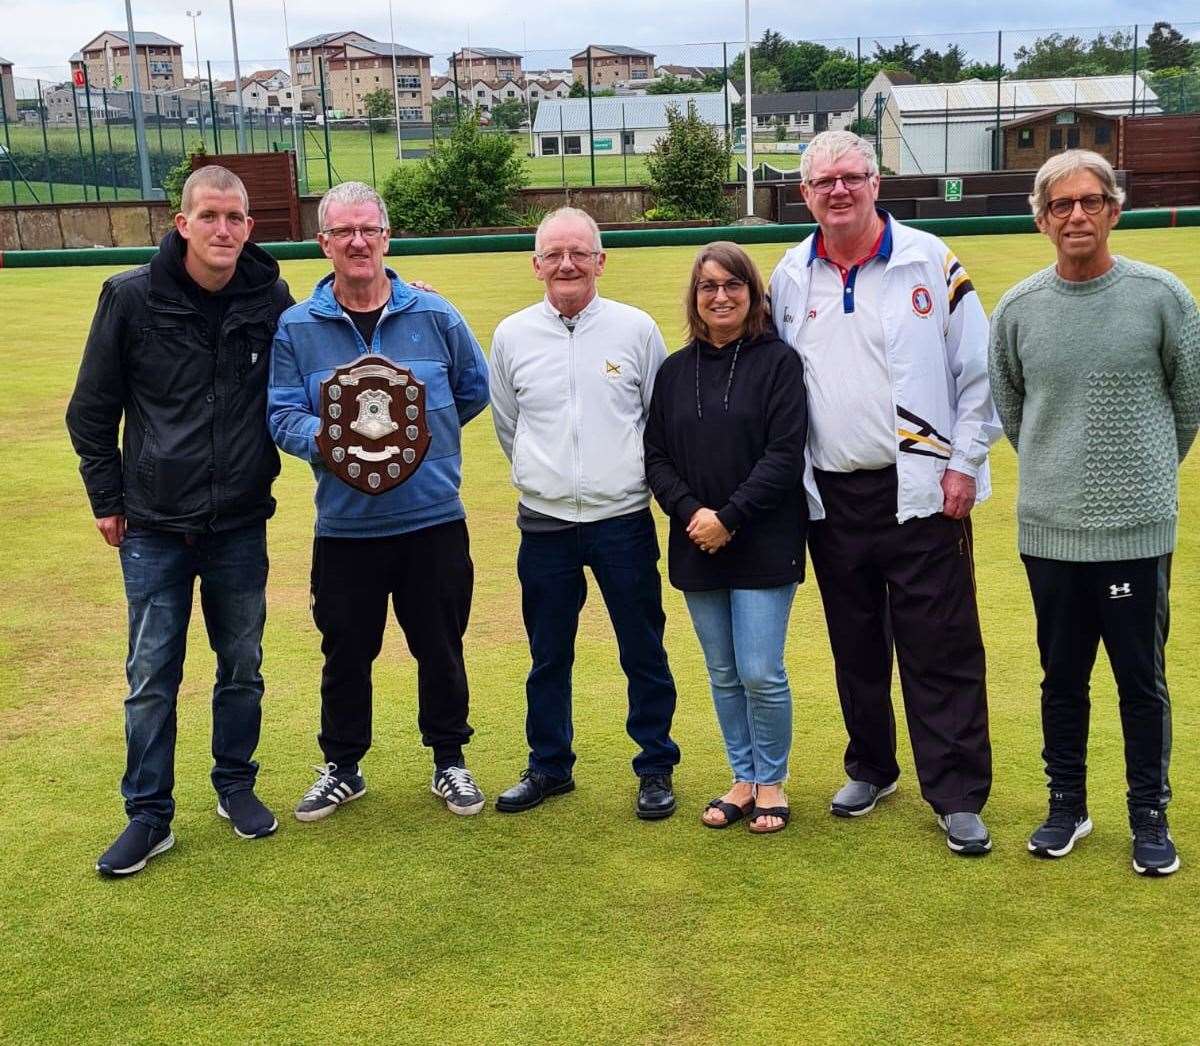 Highland Triples winners (from left) Ronnie Bain Jnr, David Manson and Ronnie Bain Snr with runners up Julie Knapp, Douglas Morrison and Peter Knapp.